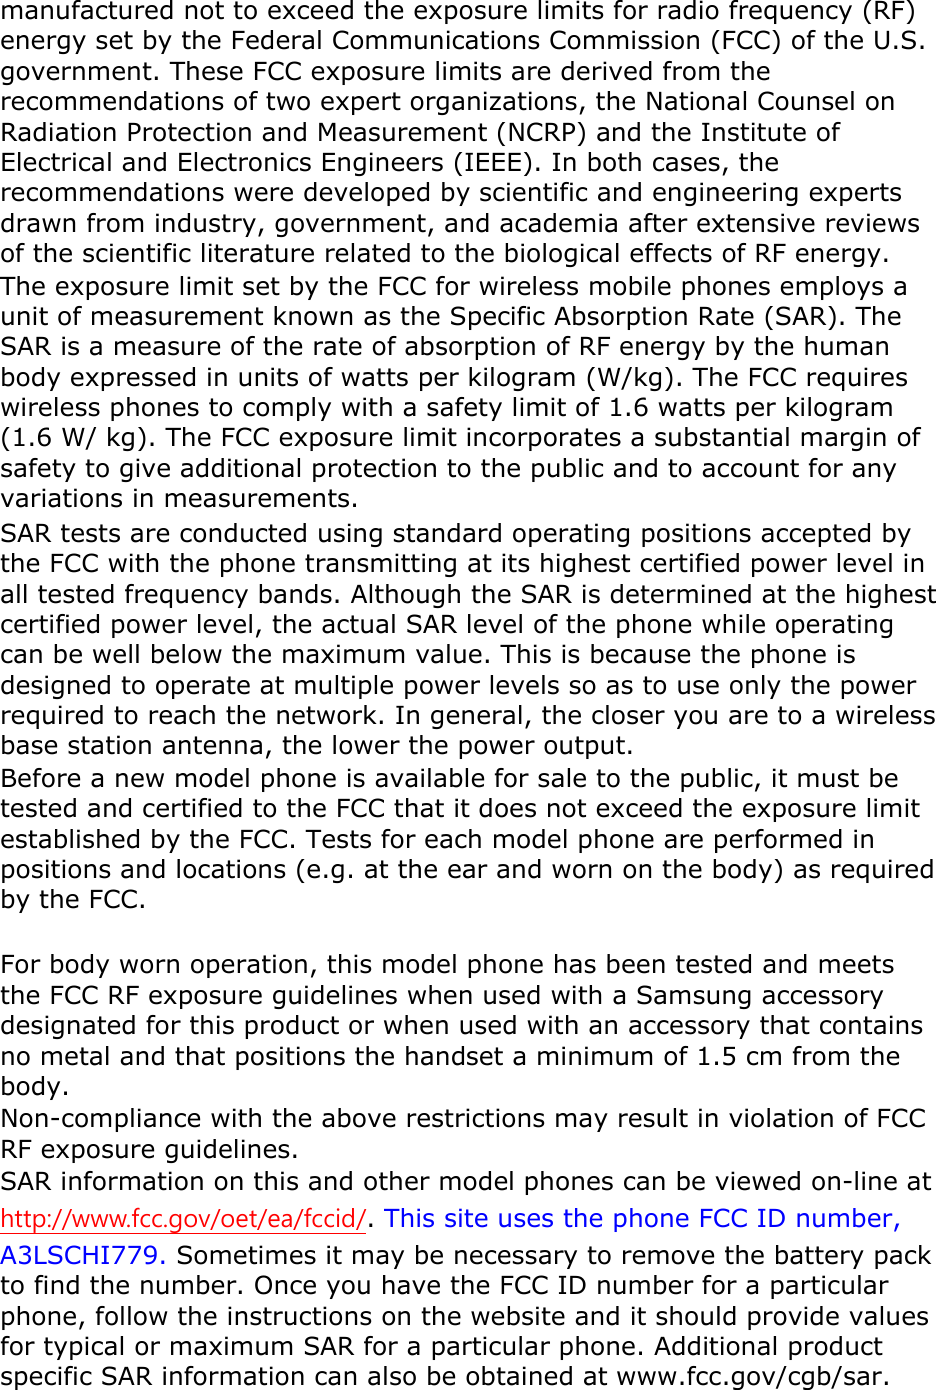 manufactured not to exceed the exposure limits for radio frequency (RF) energy set by the Federal Communications Commission (FCC) of the U.S. government. These FCC exposure limits are derived from the recommendations of two expert organizations, the National Counsel on Radiation Protection and Measurement (NCRP) and the Institute of Electrical and Electronics Engineers (IEEE). In both cases, the recommendations were developed by scientific and engineering experts drawn from industry, government, and academia after extensive reviews of the scientific literature related to the biological effects of RF energy. The exposure limit set by the FCC for wireless mobile phones employs a unit of measurement known as the Specific Absorption Rate (SAR). The SAR is a measure of the rate of absorption of RF energy by the human body expressed in units of watts per kilogram (W/kg). The FCC requires wireless phones to comply with a safety limit of 1.6 watts per kilogram (1.6 W/ kg). The FCC exposure limit incorporates a substantial margin of safety to give additional protection to the public and to account for any variations in measurements. SAR tests are conducted using standard operating positions accepted by the FCC with the phone transmitting at its highest certified power level in all tested frequency bands. Although the SAR is determined at the highest certified power level, the actual SAR level of the phone while operating can be well below the maximum value. This is because the phone is designed to operate at multiple power levels so as to use only the power required to reach the network. In general, the closer you are to a wireless base station antenna, the lower the power output. Before a new model phone is available for sale to the public, it must be tested and certified to the FCC that it does not exceed the exposure limit established by the FCC. Tests for each model phone are performed in positions and locations (e.g. at the ear and worn on the body) as required by the FCC.      For body worn operation, this model phone has been tested and meets the FCC RF exposure guidelines when used with a Samsung accessory designated for this product or when used with an accessory that contains no metal and that positions the handset a minimum of 1.5 cm from the body.  Non-compliance with the above restrictions may result in violation of FCC RF exposure guidelines. SAR information on this and other model phones can be viewed on-line at http://www.fcc.gov/oet/ea/fccid/. This site uses the phone FCC ID number, A3LSCHI779. Sometimes it may be necessary to remove the battery pack to find the number. Once you have the FCC ID number for a particular phone, follow the instructions on the website and it should provide values for typical or maximum SAR for a particular phone. Additional product specific SAR information can also be obtained at www.fcc.gov/cgb/sar. 